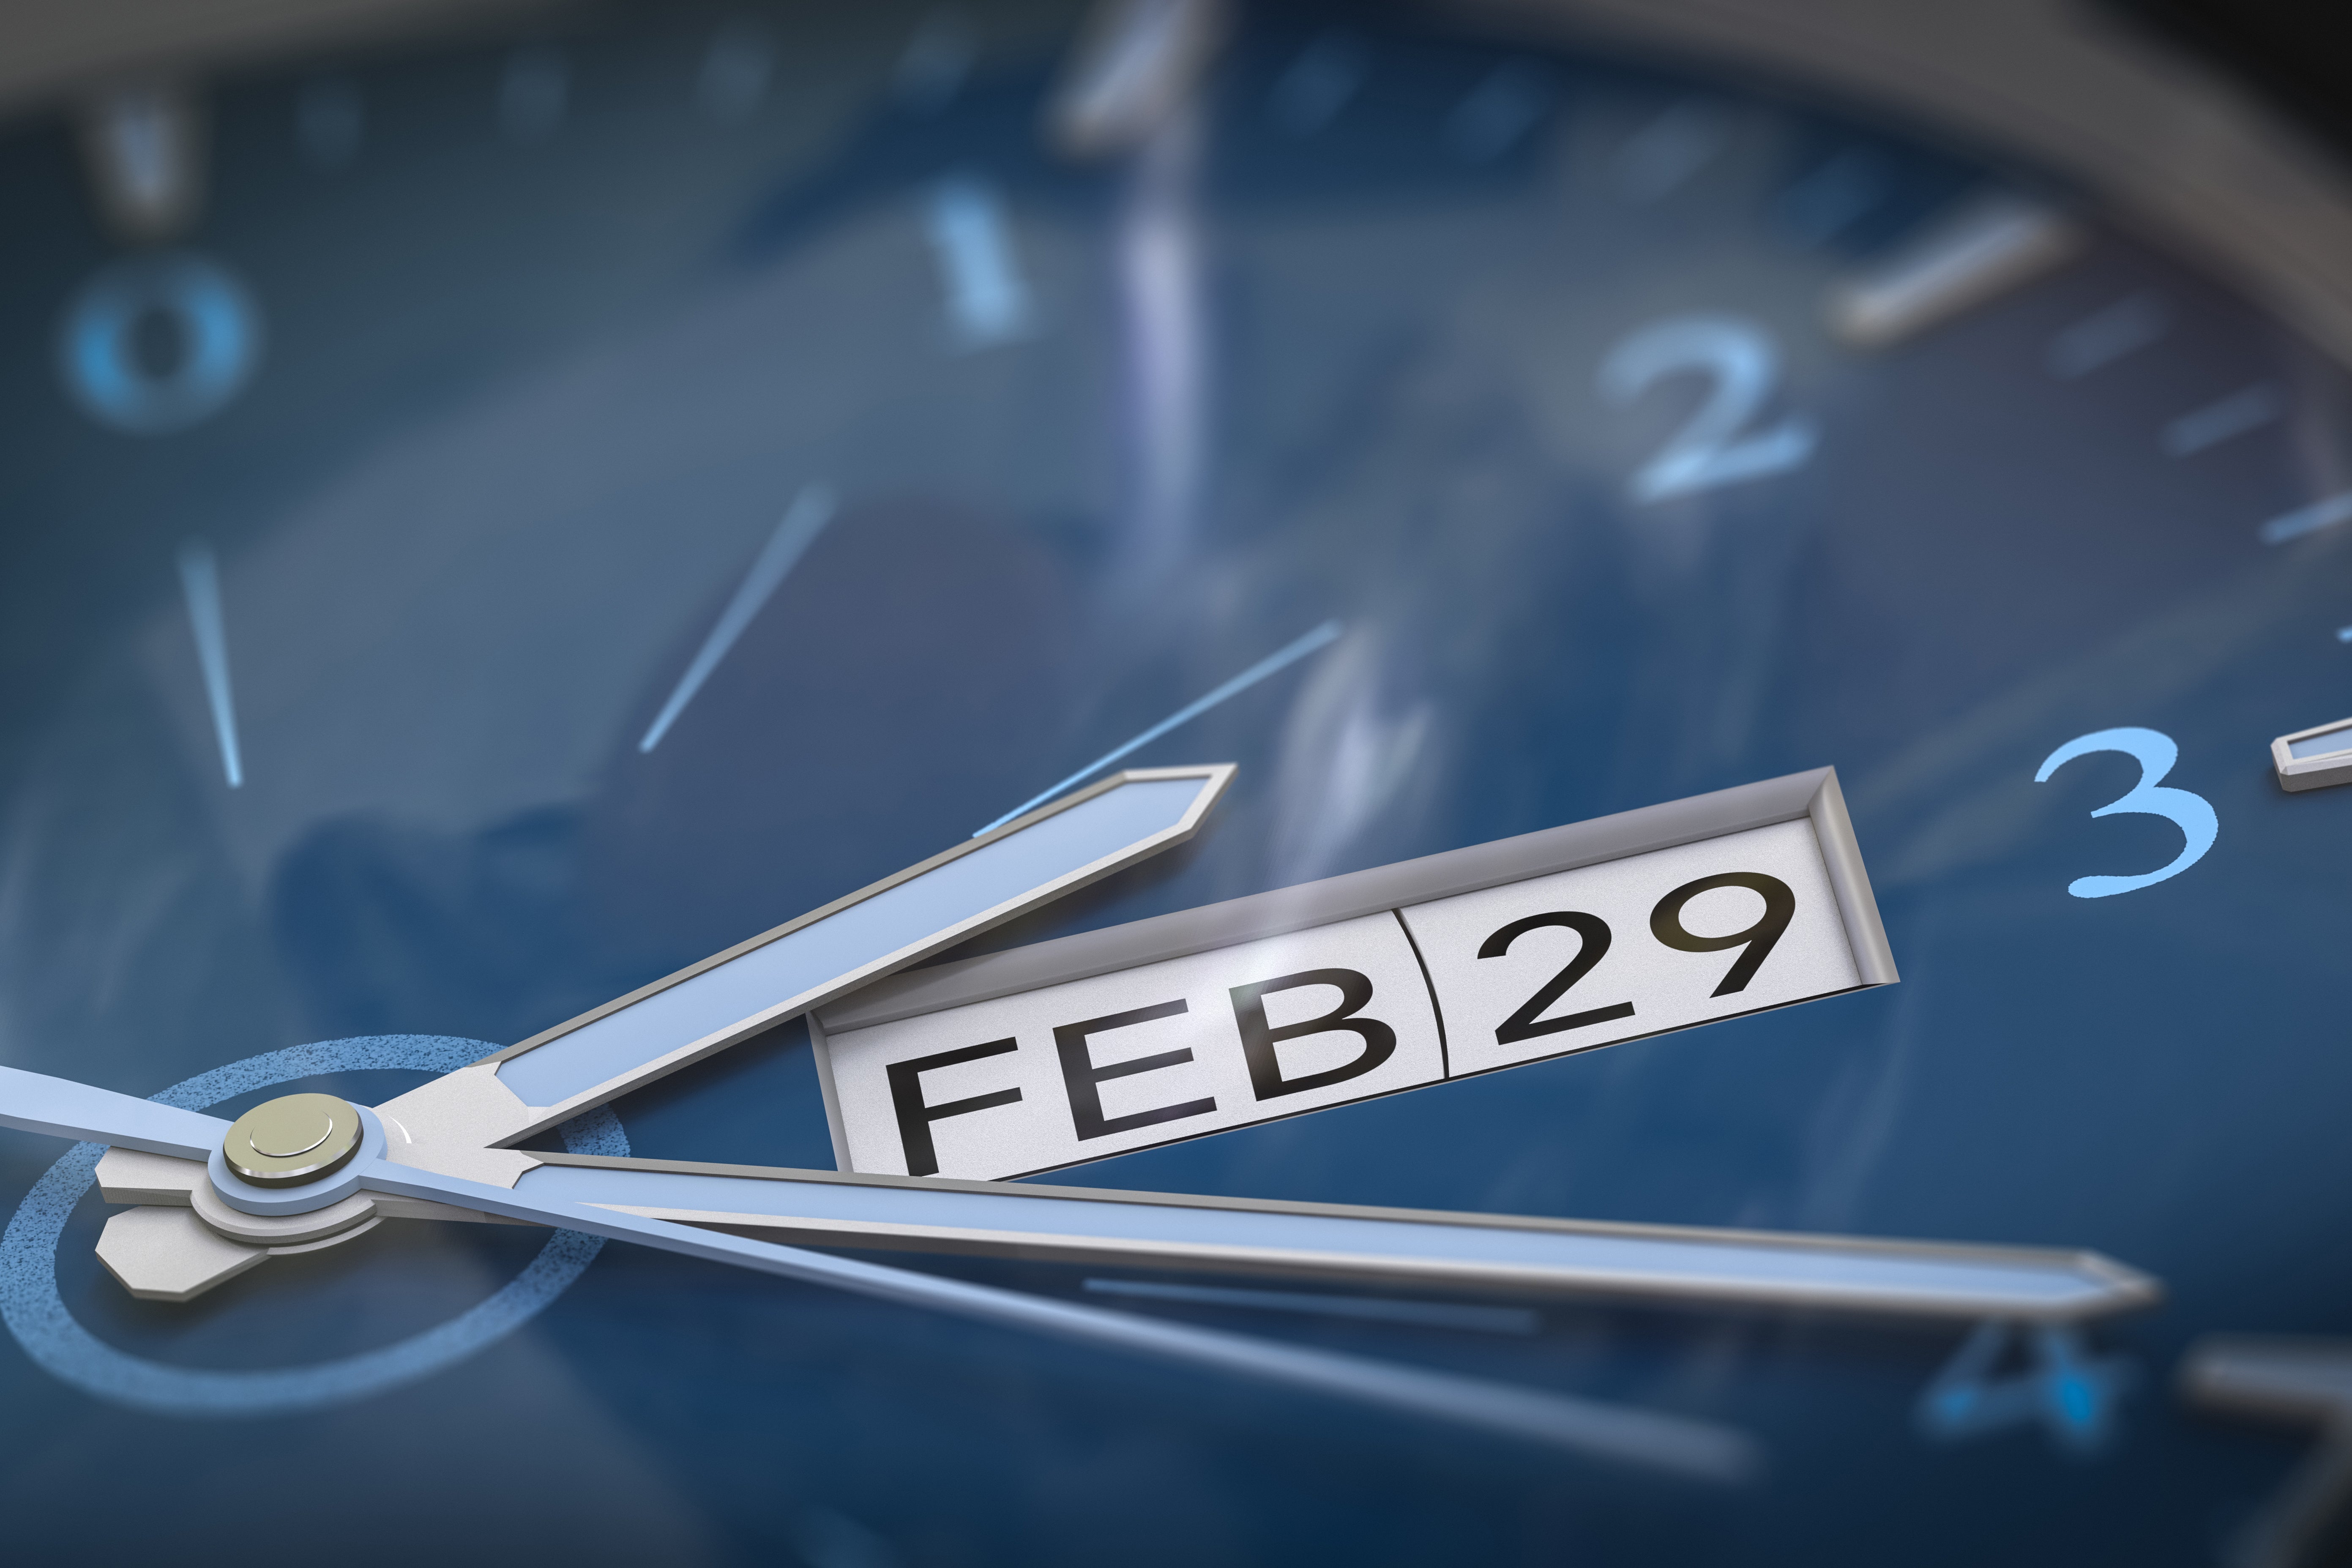 Why Do We Have a Leap Year Anyway?